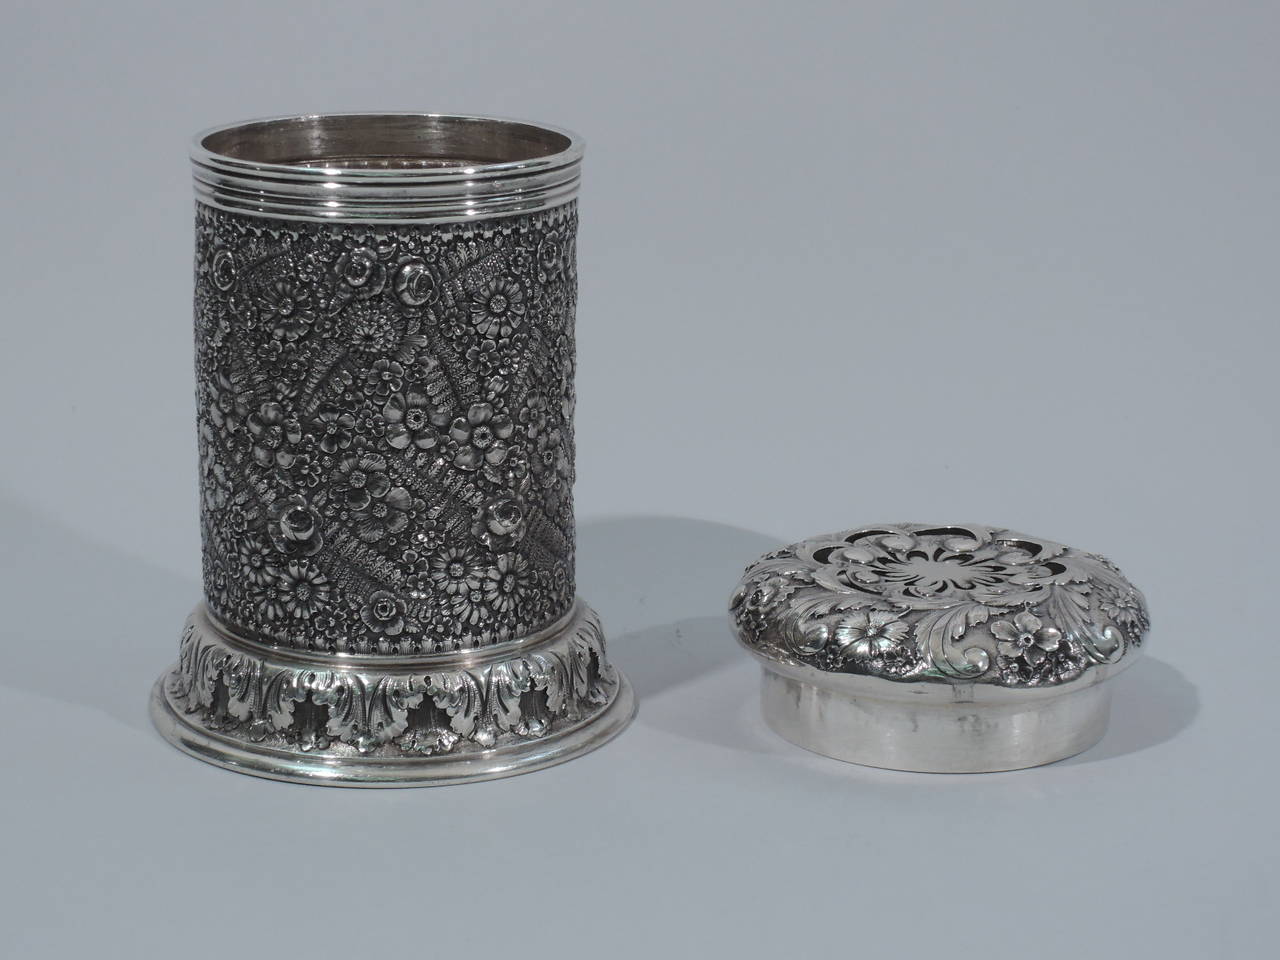 19th Century Unusual Sterling Silver Shaker with Floral Repousse by Tiffany 